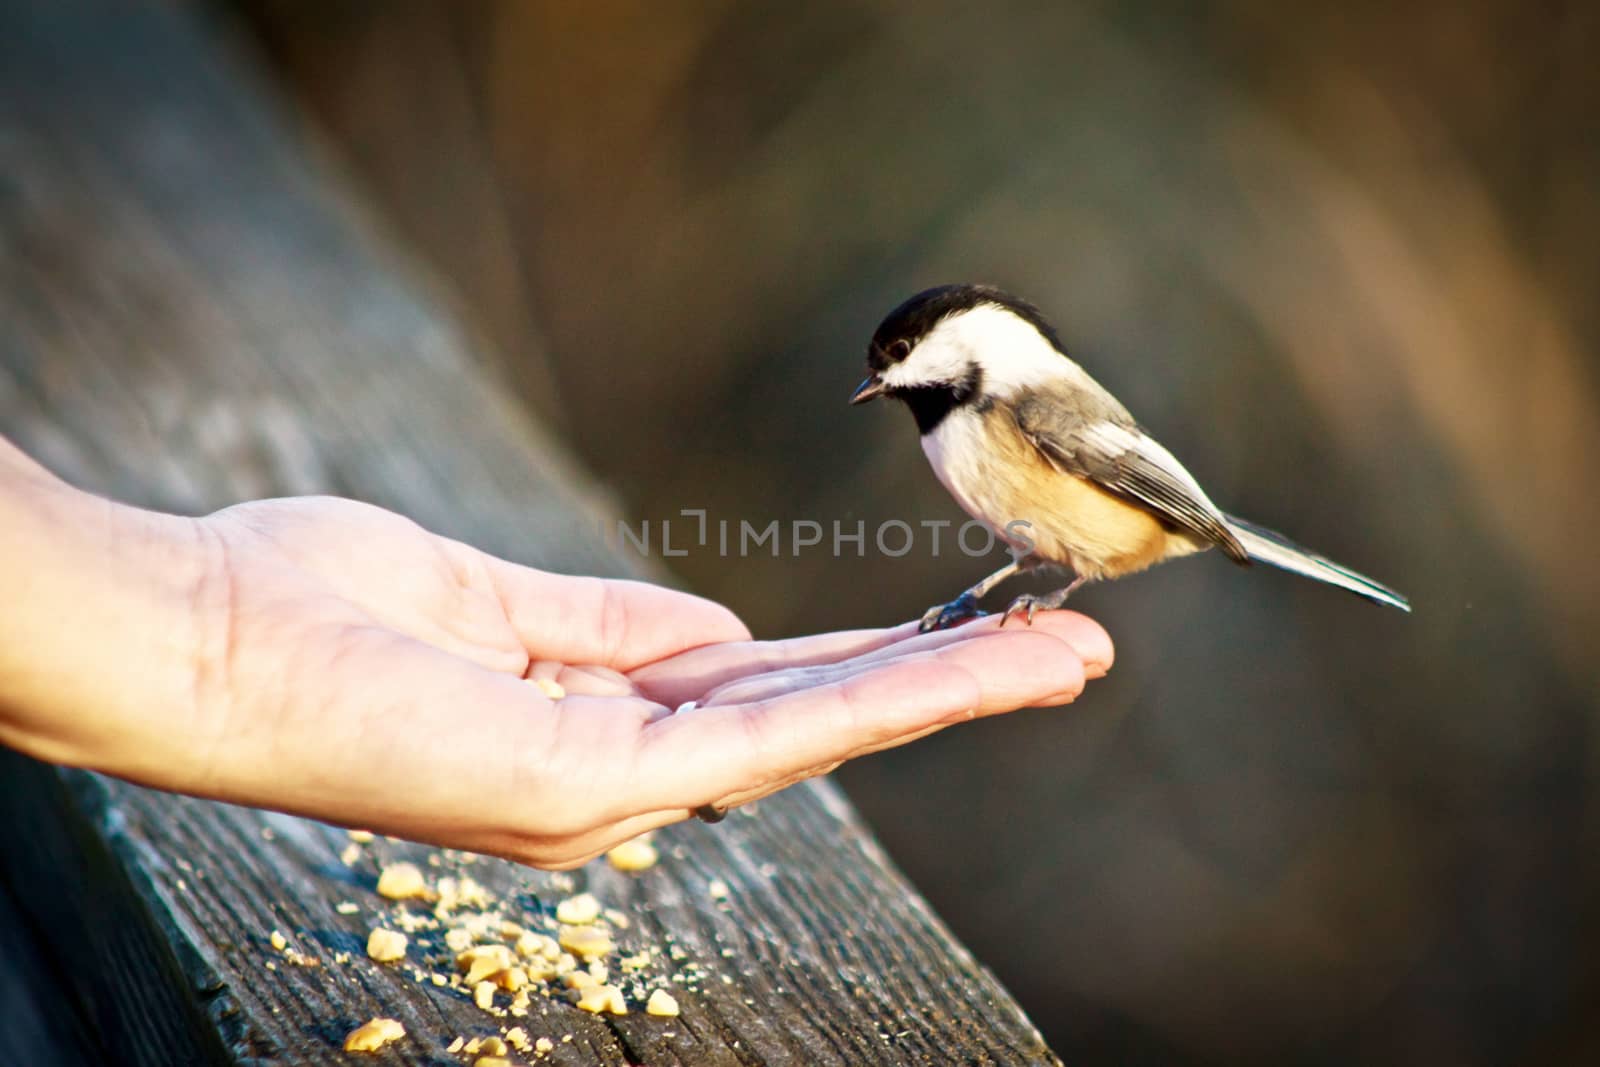 Black capped chickadee perched on human hand. Palm is upturned cupping seeds.